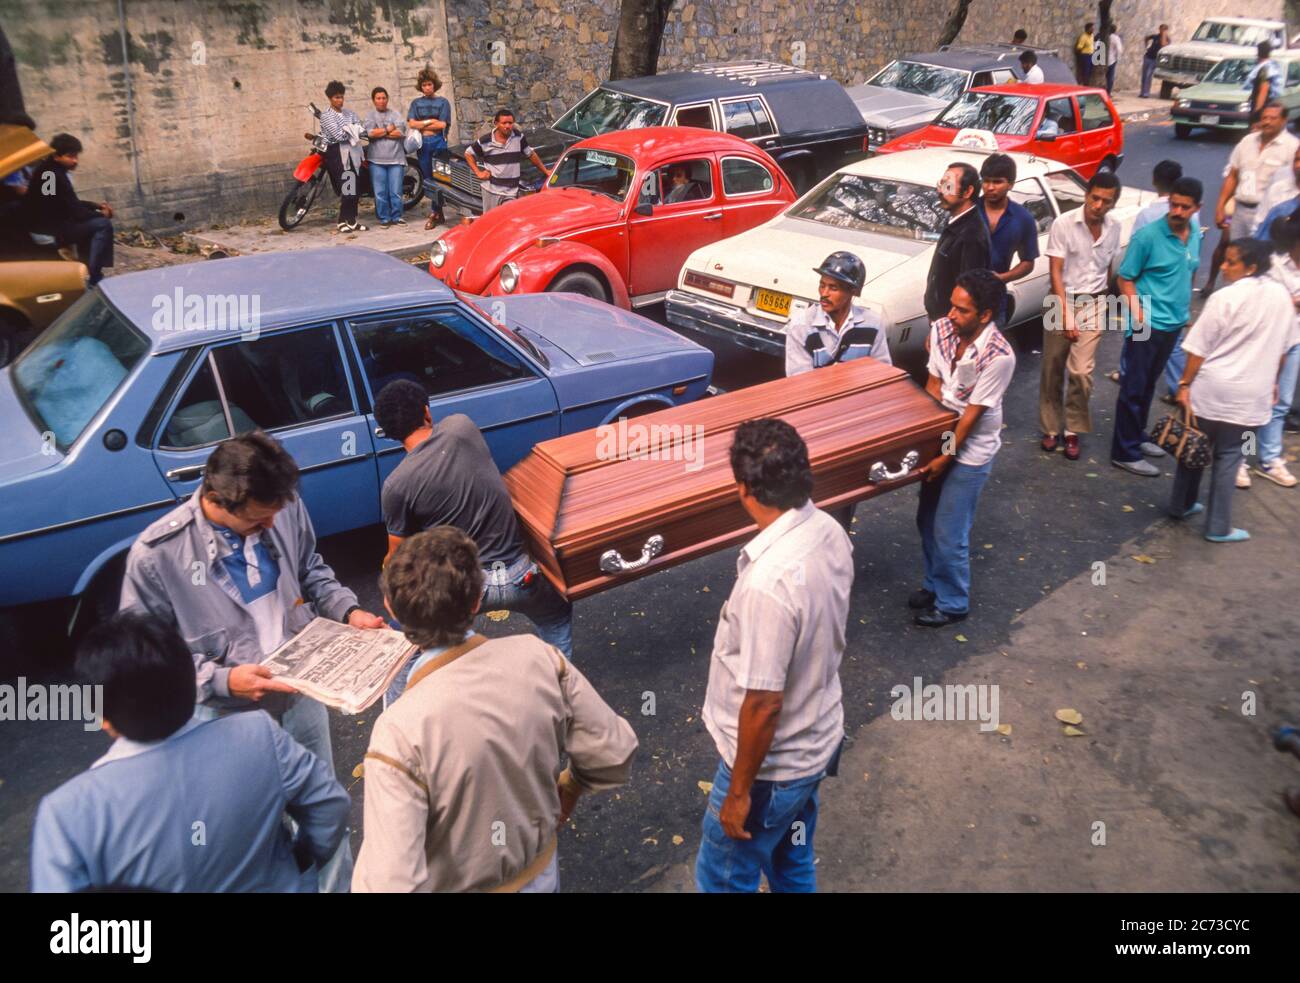 CARACAS, VENEZUELA, MARCH1989 - Dead bodies arrive at morgue during state of emergency during protests, riots and looting in Caracas, know as the Caracazo. Stock Photo